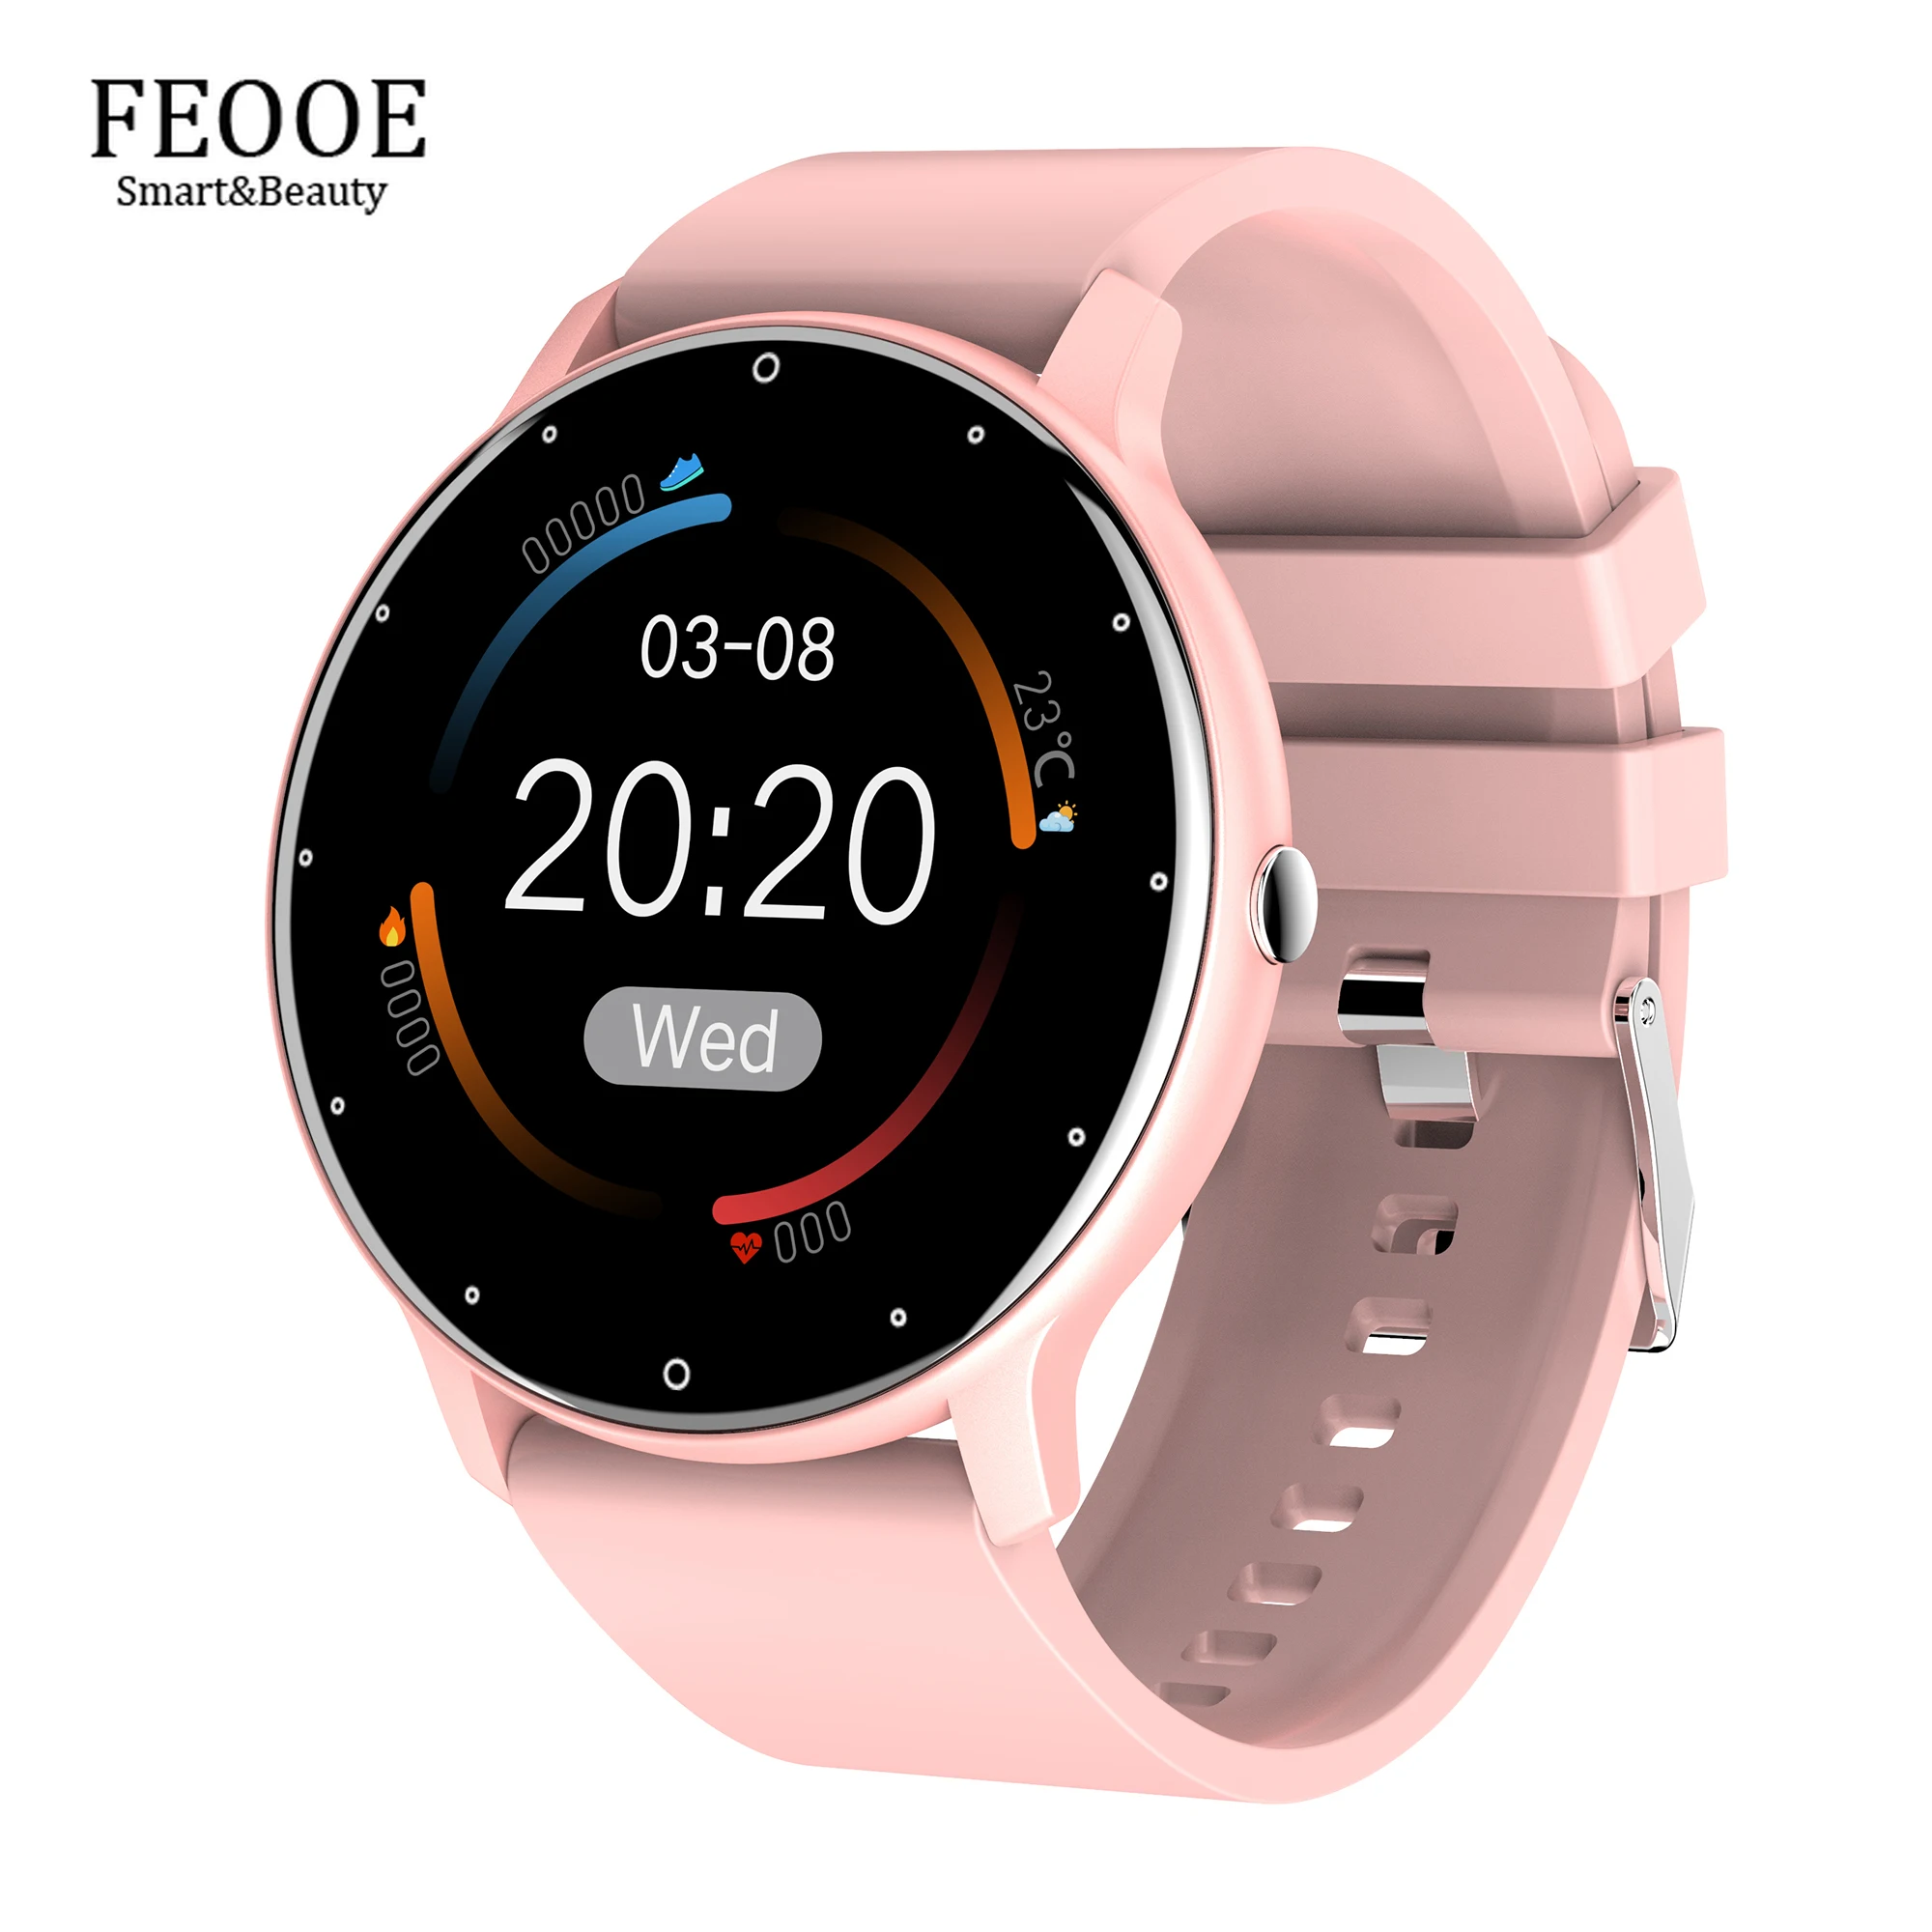 

FEOOE Smart Watch 1.28 Inch Round Screen IP67 Waterproof Watches Heart Rate Monitoring Weather Forecast Fitness Tracker YD